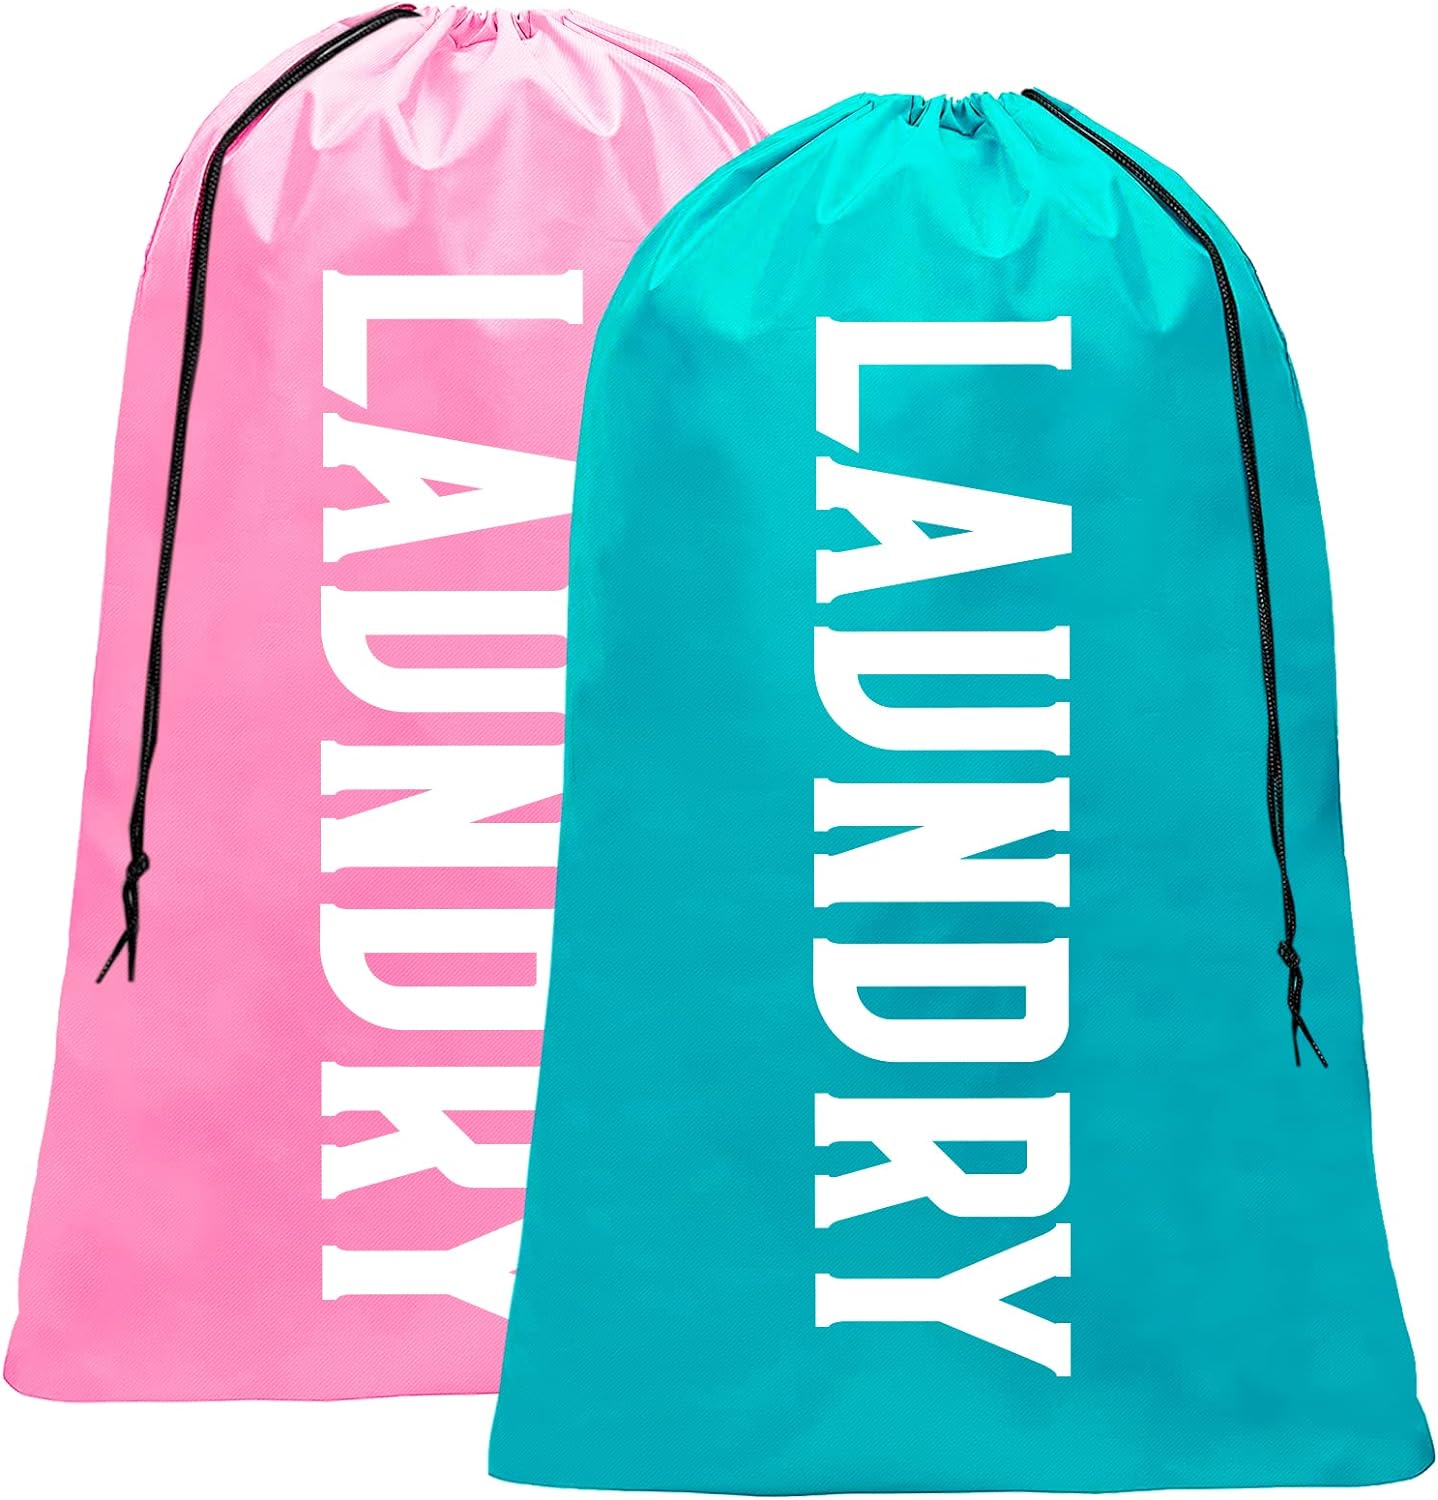 I love the strong material ,color and the size of those bags . They will be very useful for our trip Perfect for the dirty laundry. Happy with my purchase